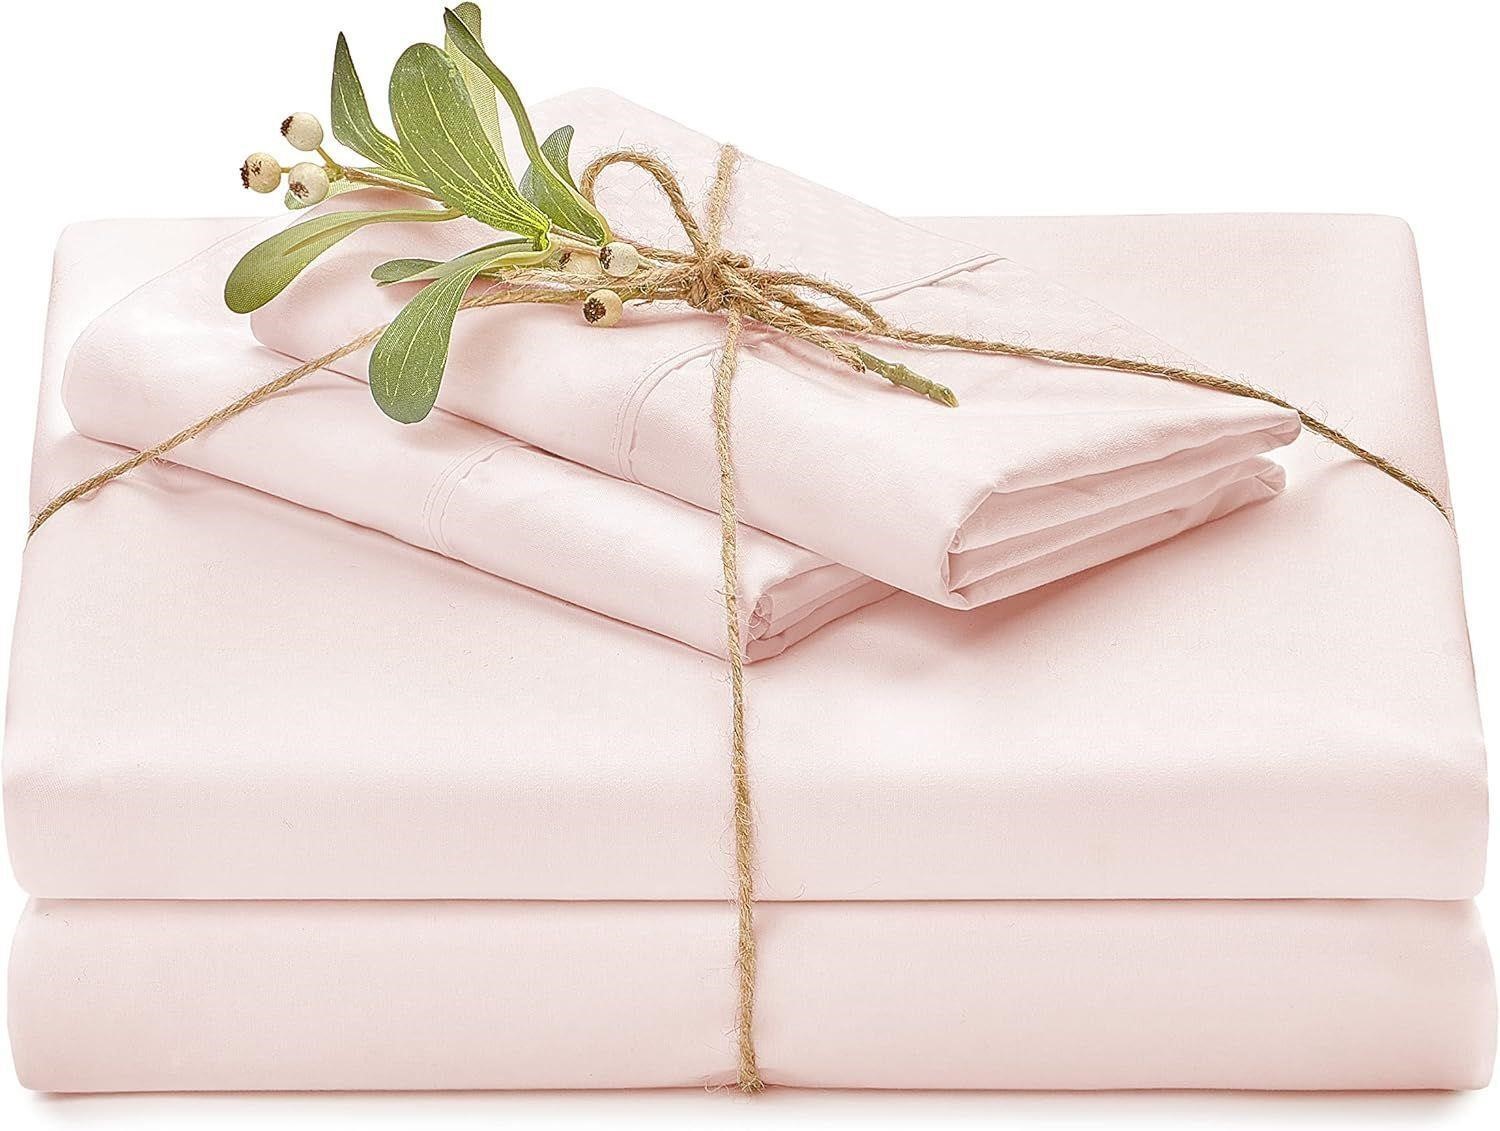 KING Size 4pc Soft Embossed Bed Sheet Set